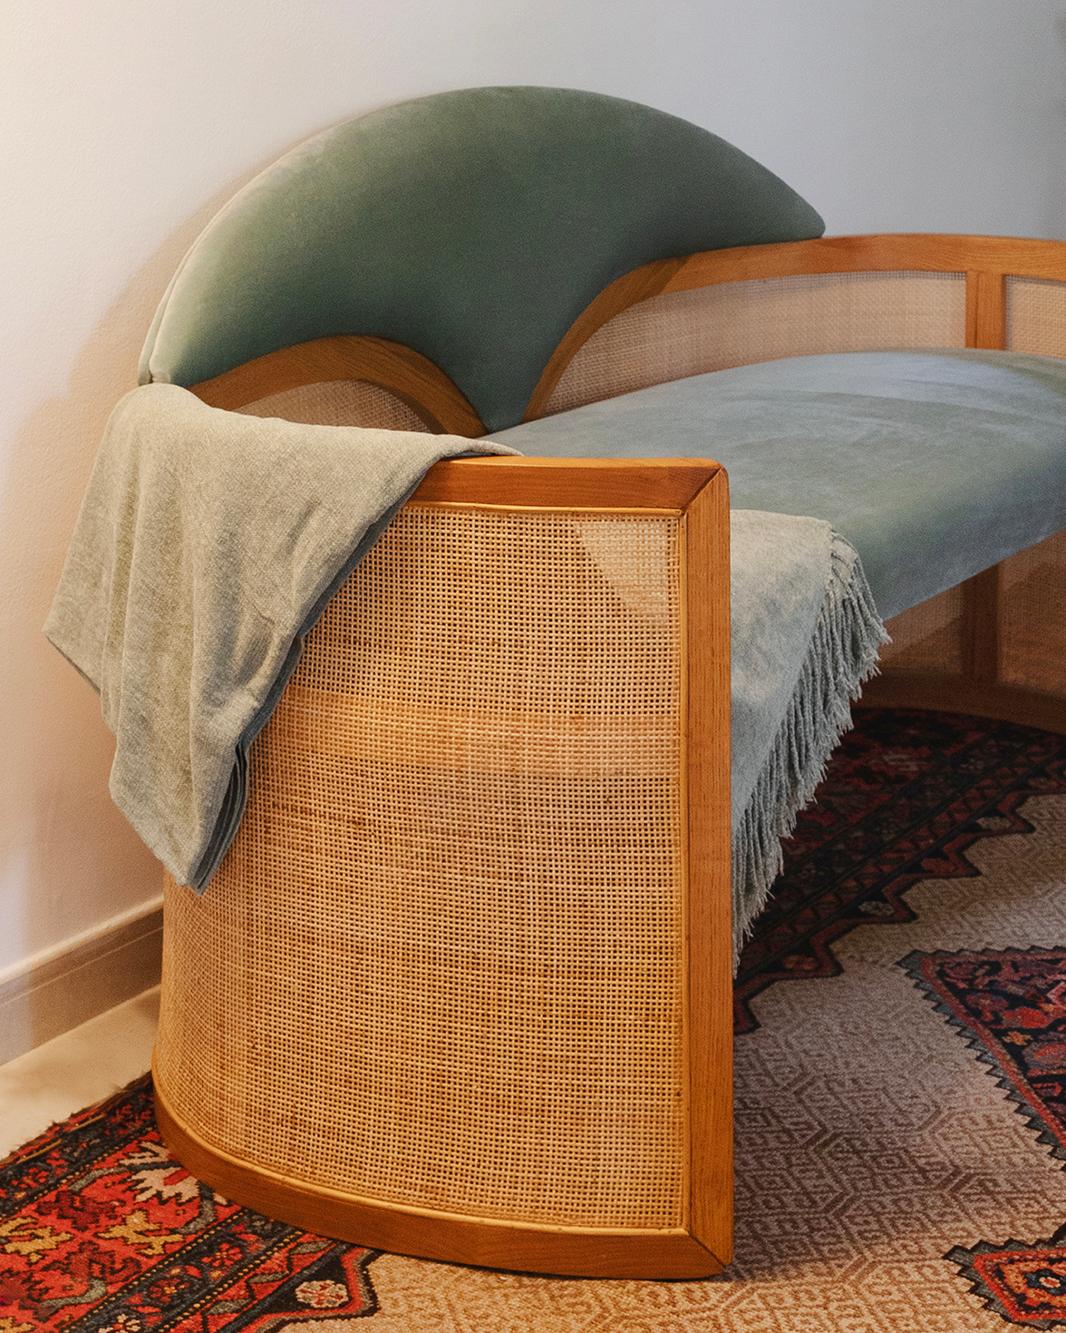 Cross My Heart Loveseat by Carla Baz
Dimensions: W 160 X D 70 X H 82 CM
Weight: 55 kg
Material: French Oak, Entirely handcrafted in solid French oak wood with cane weaving.

Cross-my-heart offers a modern take on the traditional cane weaving